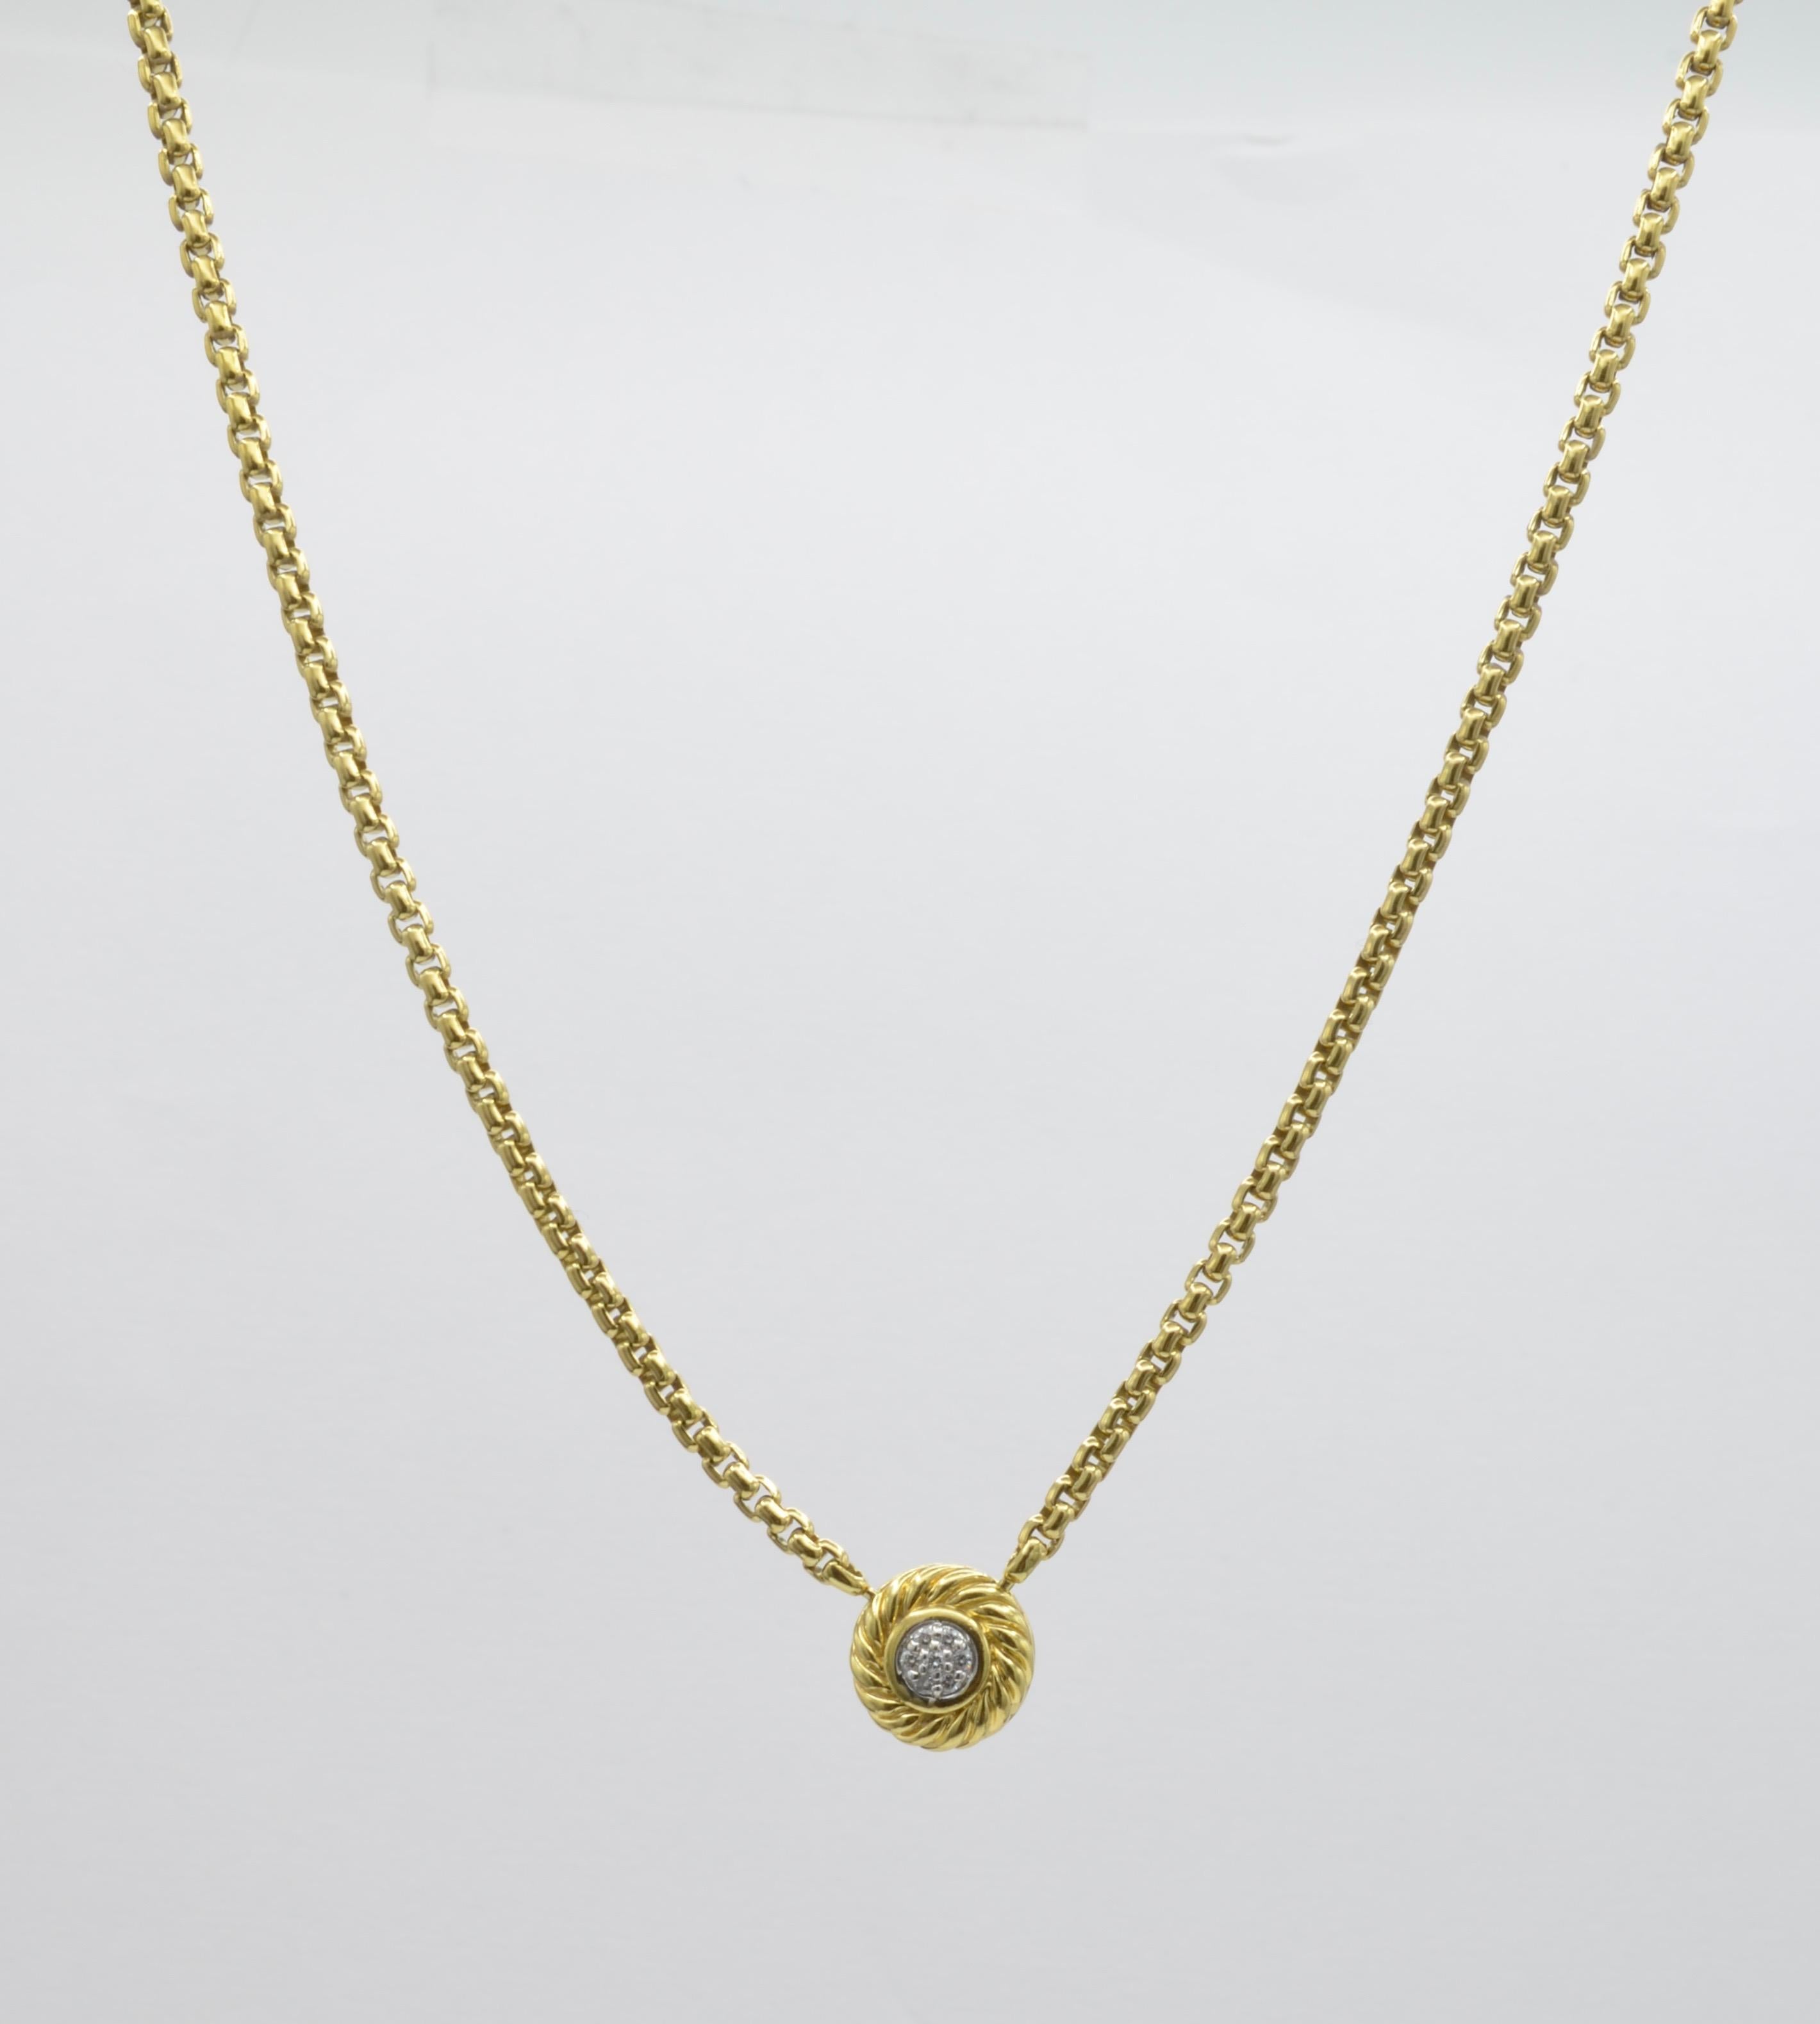 This David Yurman Cookie Necklace spirals around 0.10 carats of pave diamonds on a rounded cable chain in elegant 18K Yellow Gold. The chain is attached to the pendant as a swivel so the chain never gets twisted! The signature box chain is weighty